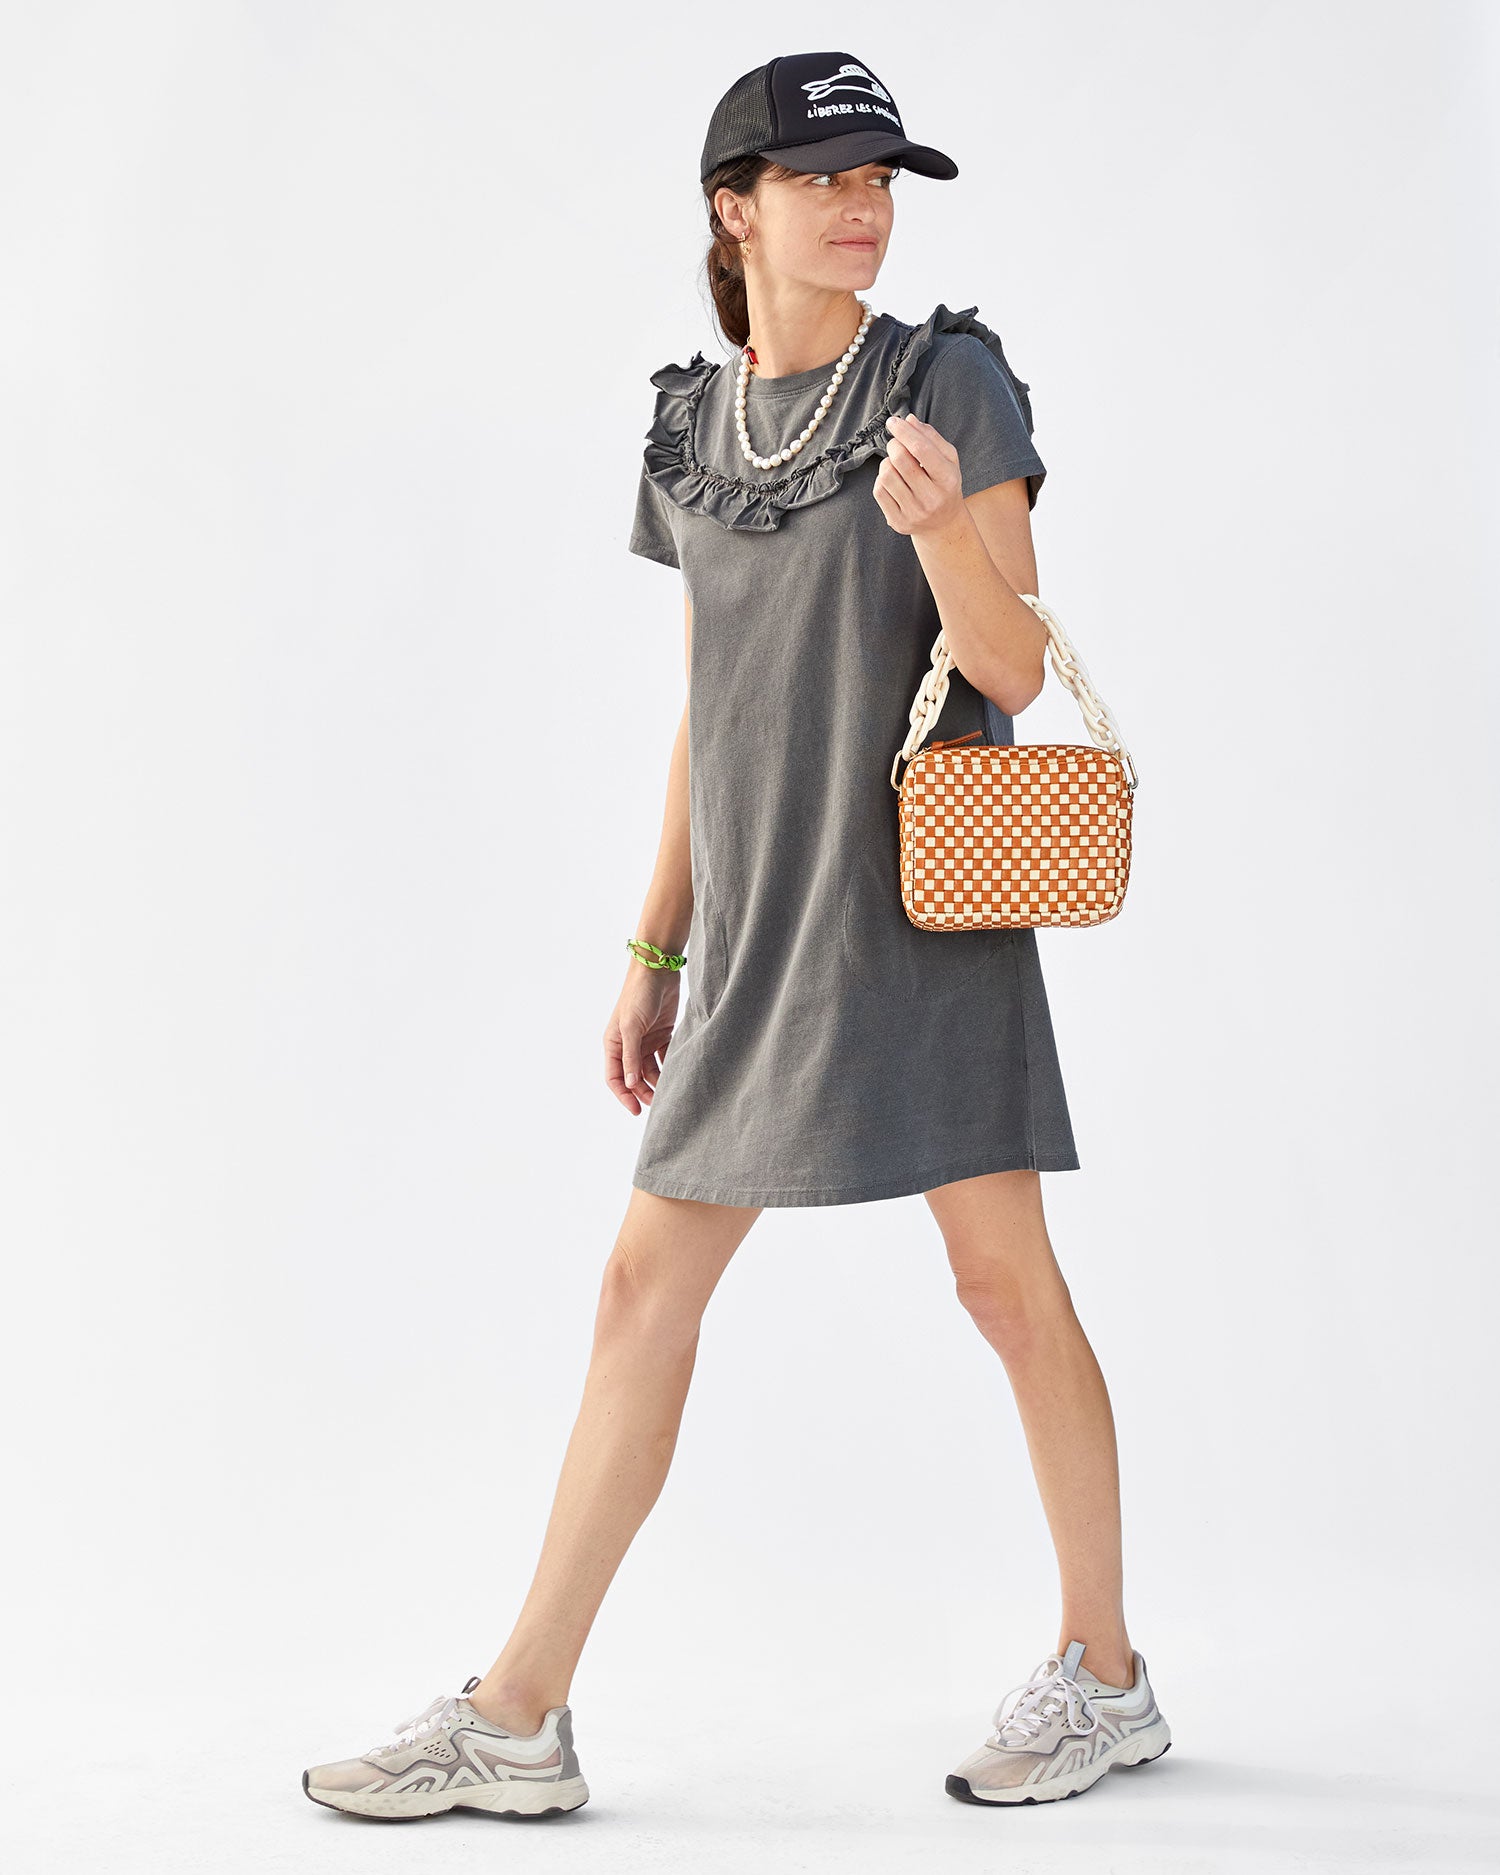 Danica wearing the Faded Black Charlotte Ruffle T-Shirt Dress with white and grey sneakers